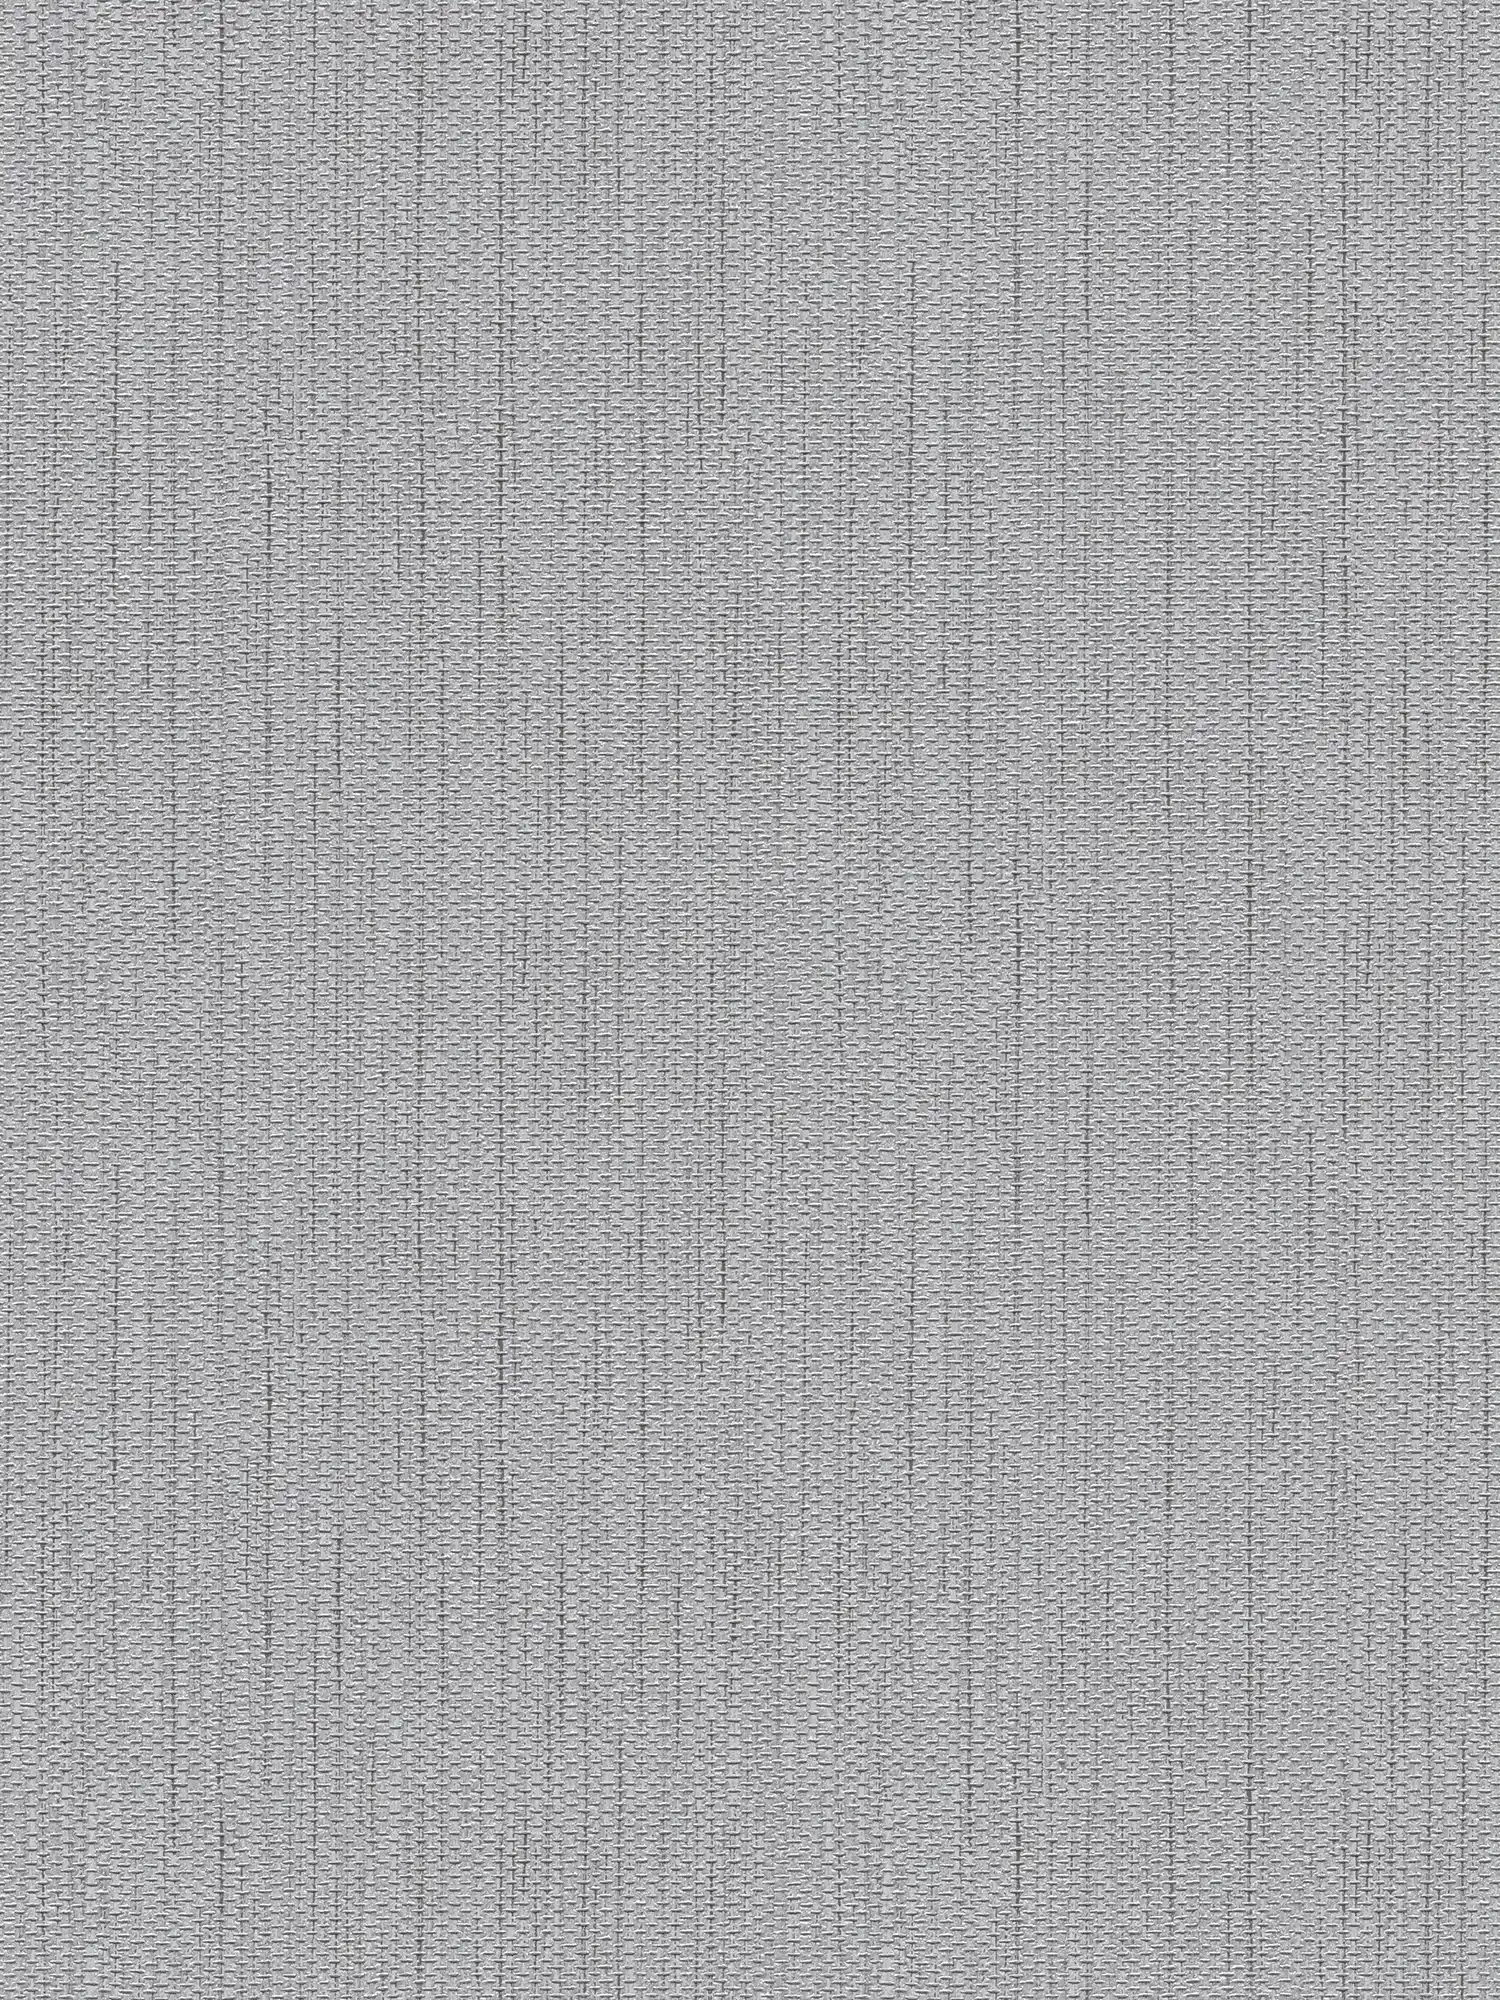 Non-woven wallpaper textile look with linen structure - grey
